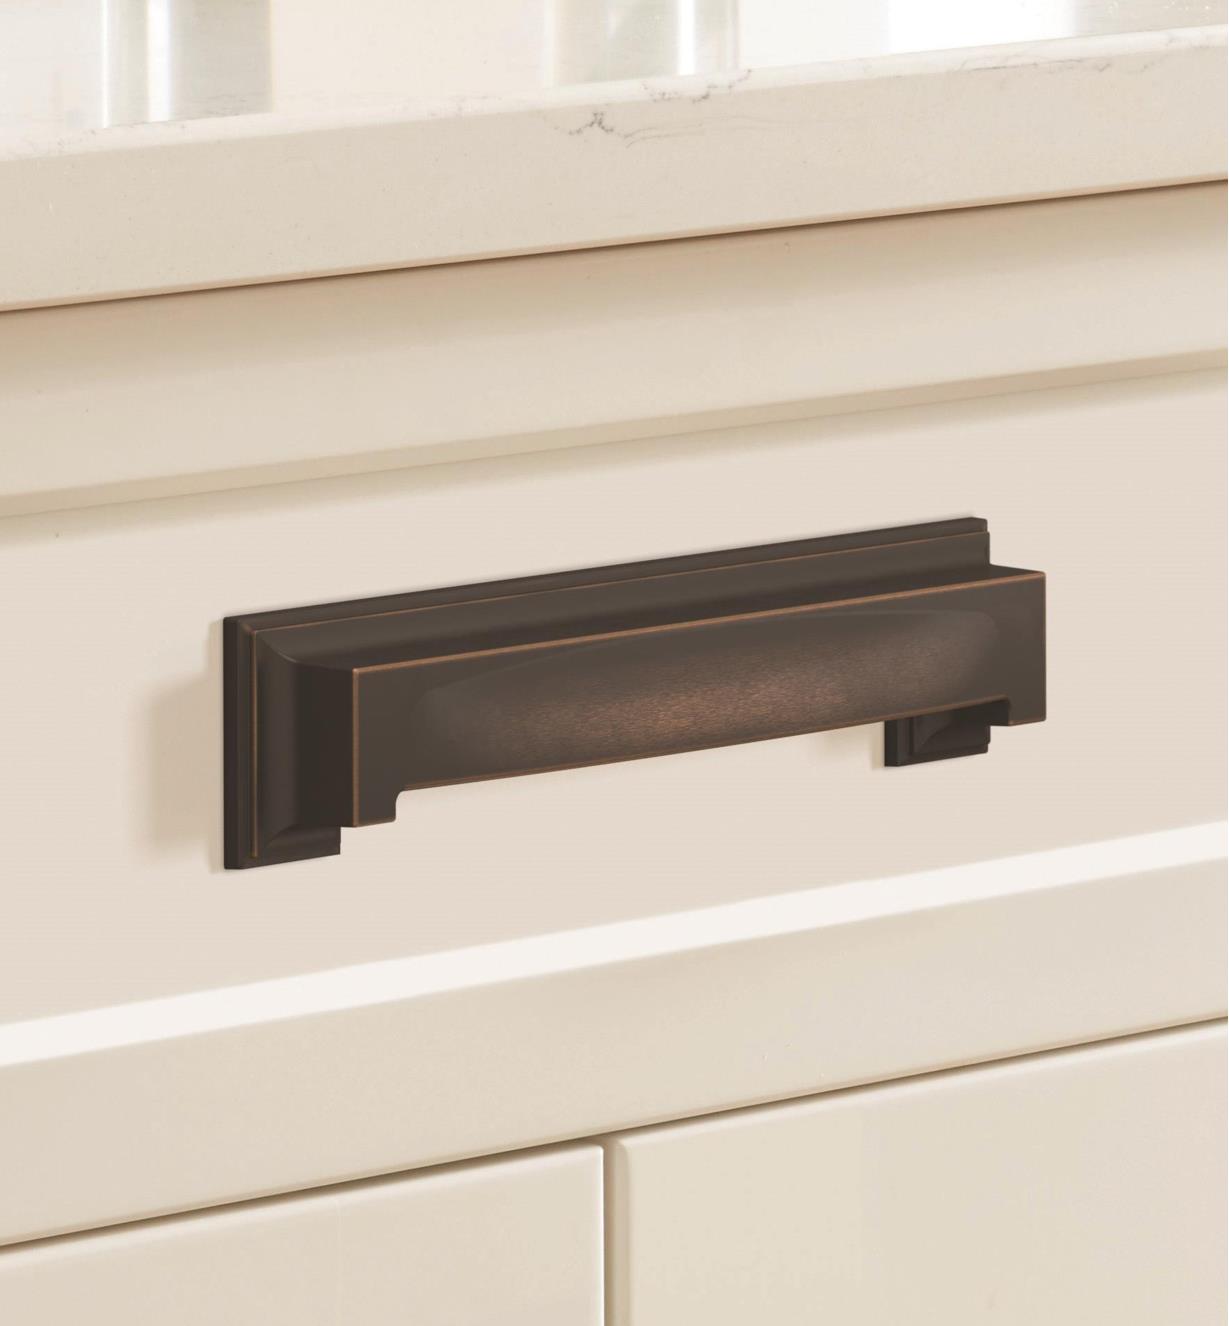 An oil-rubbed bronze Appoint cup pull connected horizontally to a white drawer